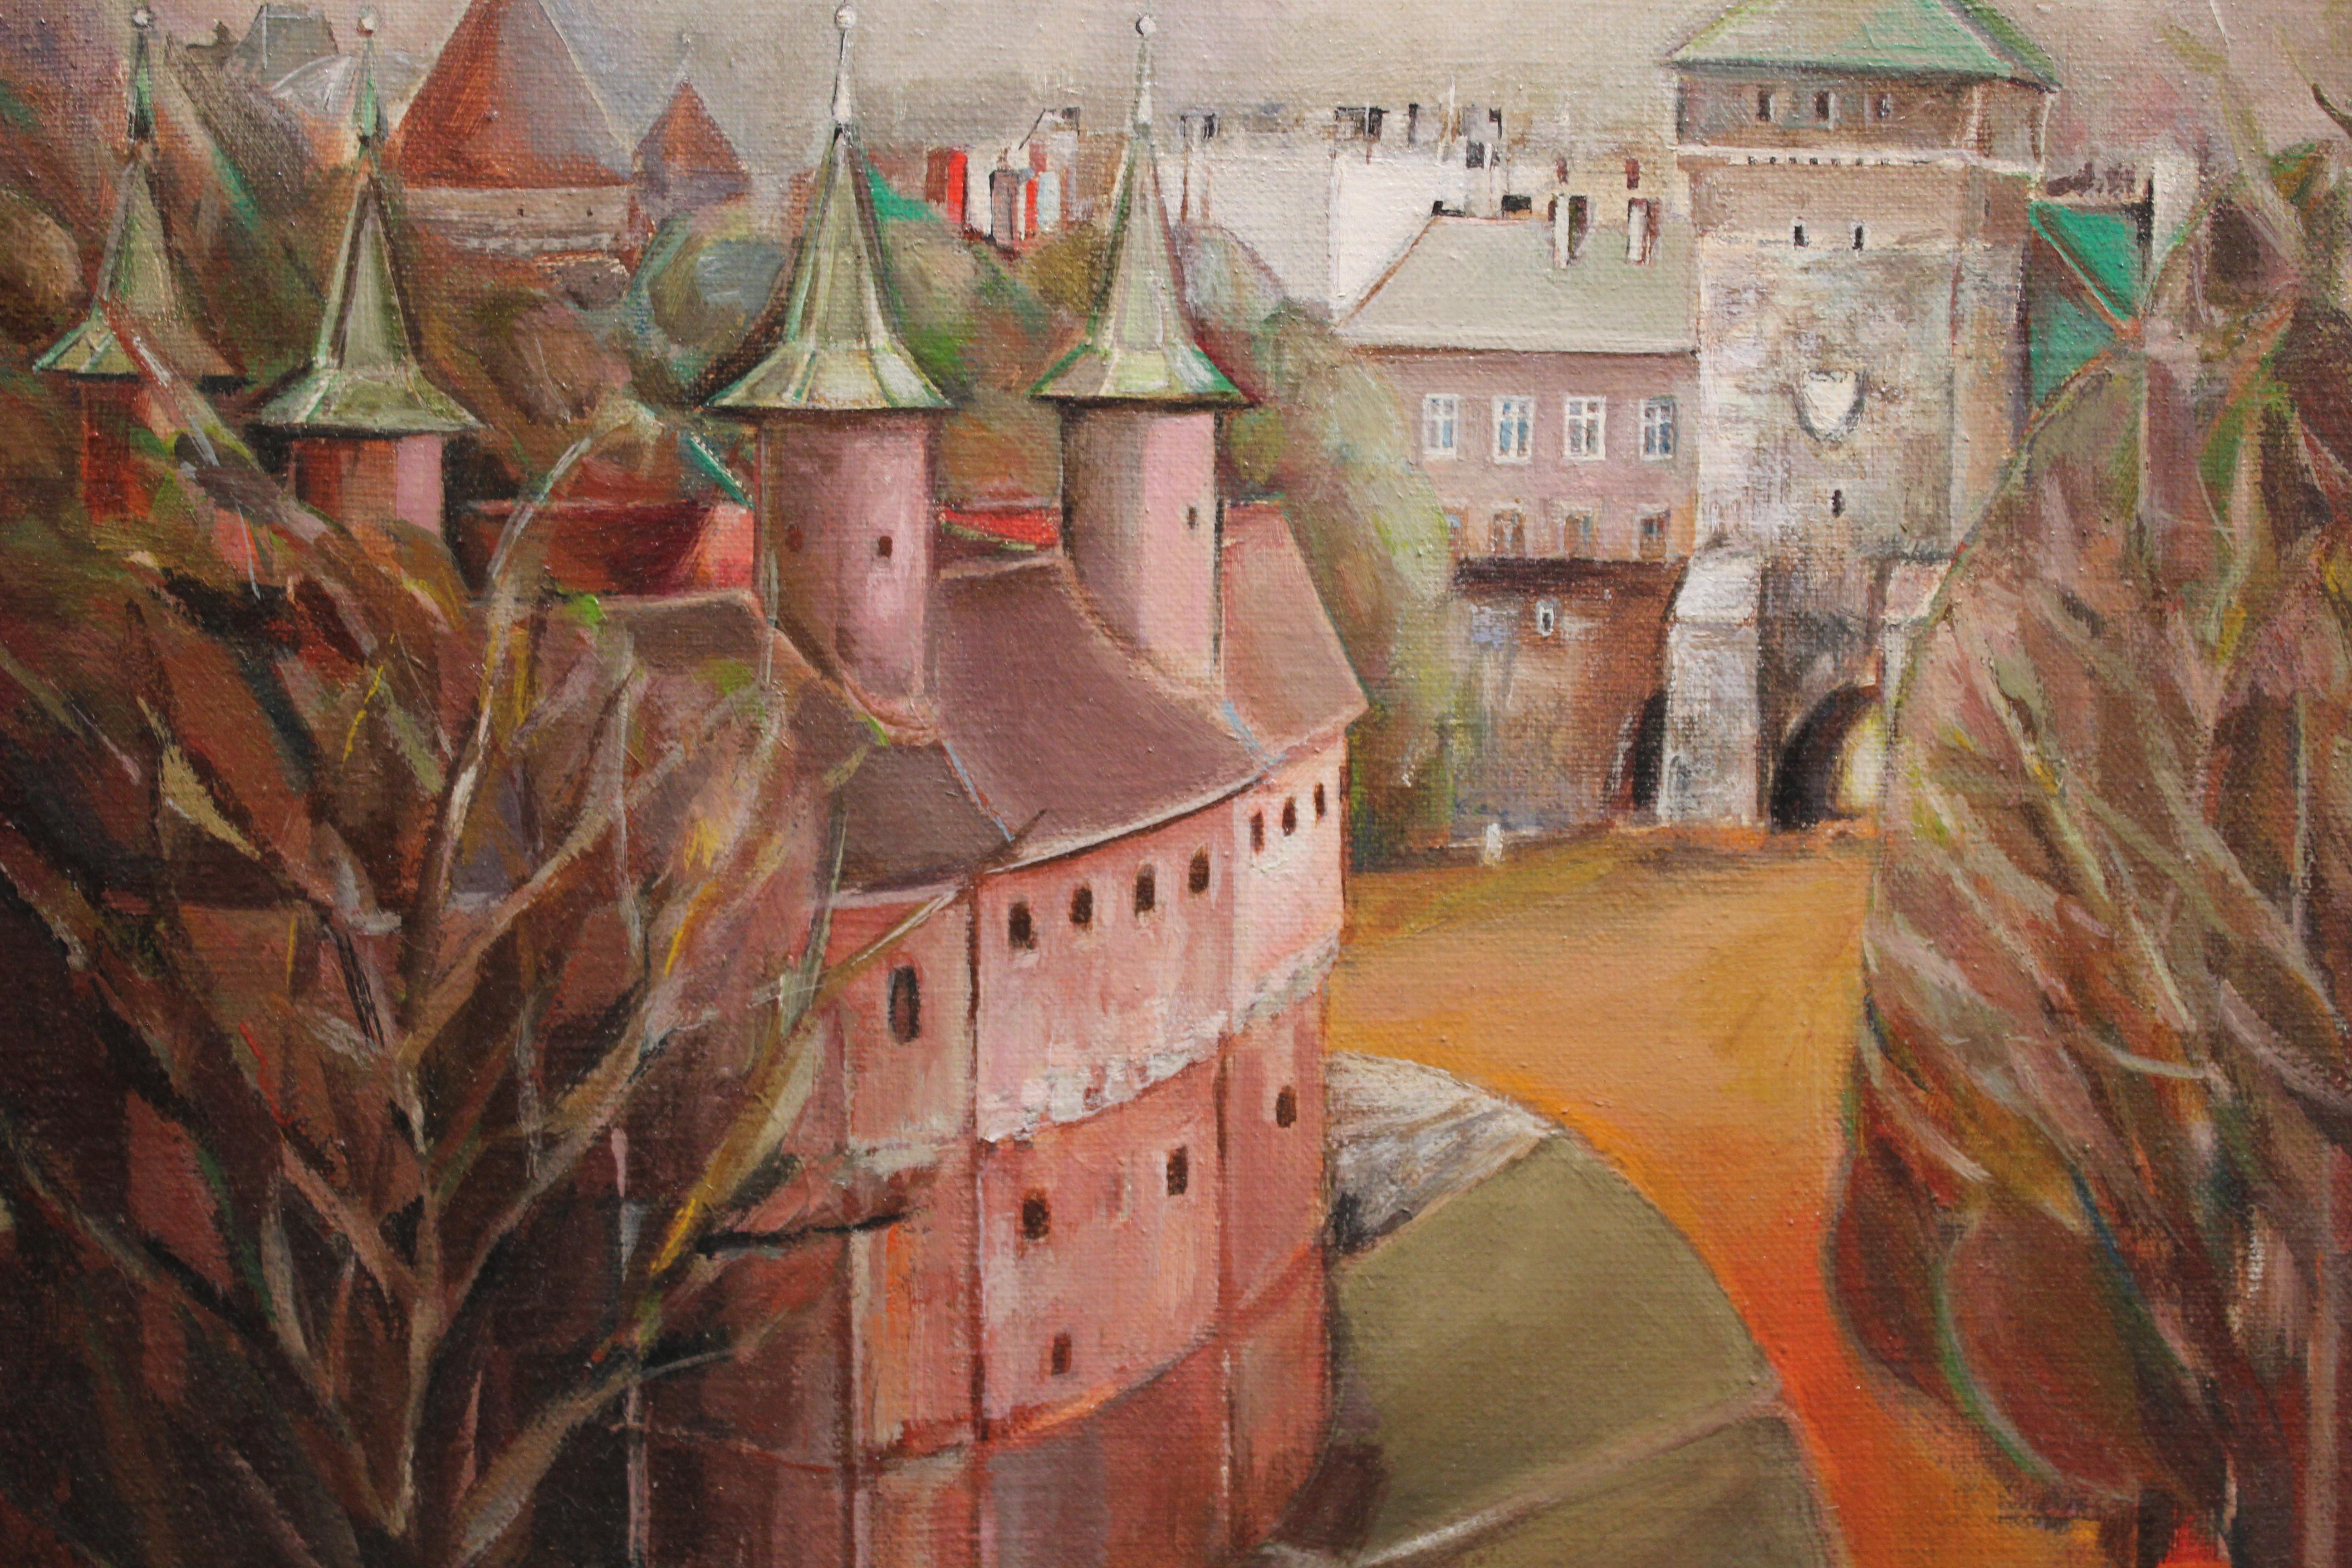 Naturalistic Fanciful Townscape - Brown Abstract Painting by Stanisława Kszetanowicz